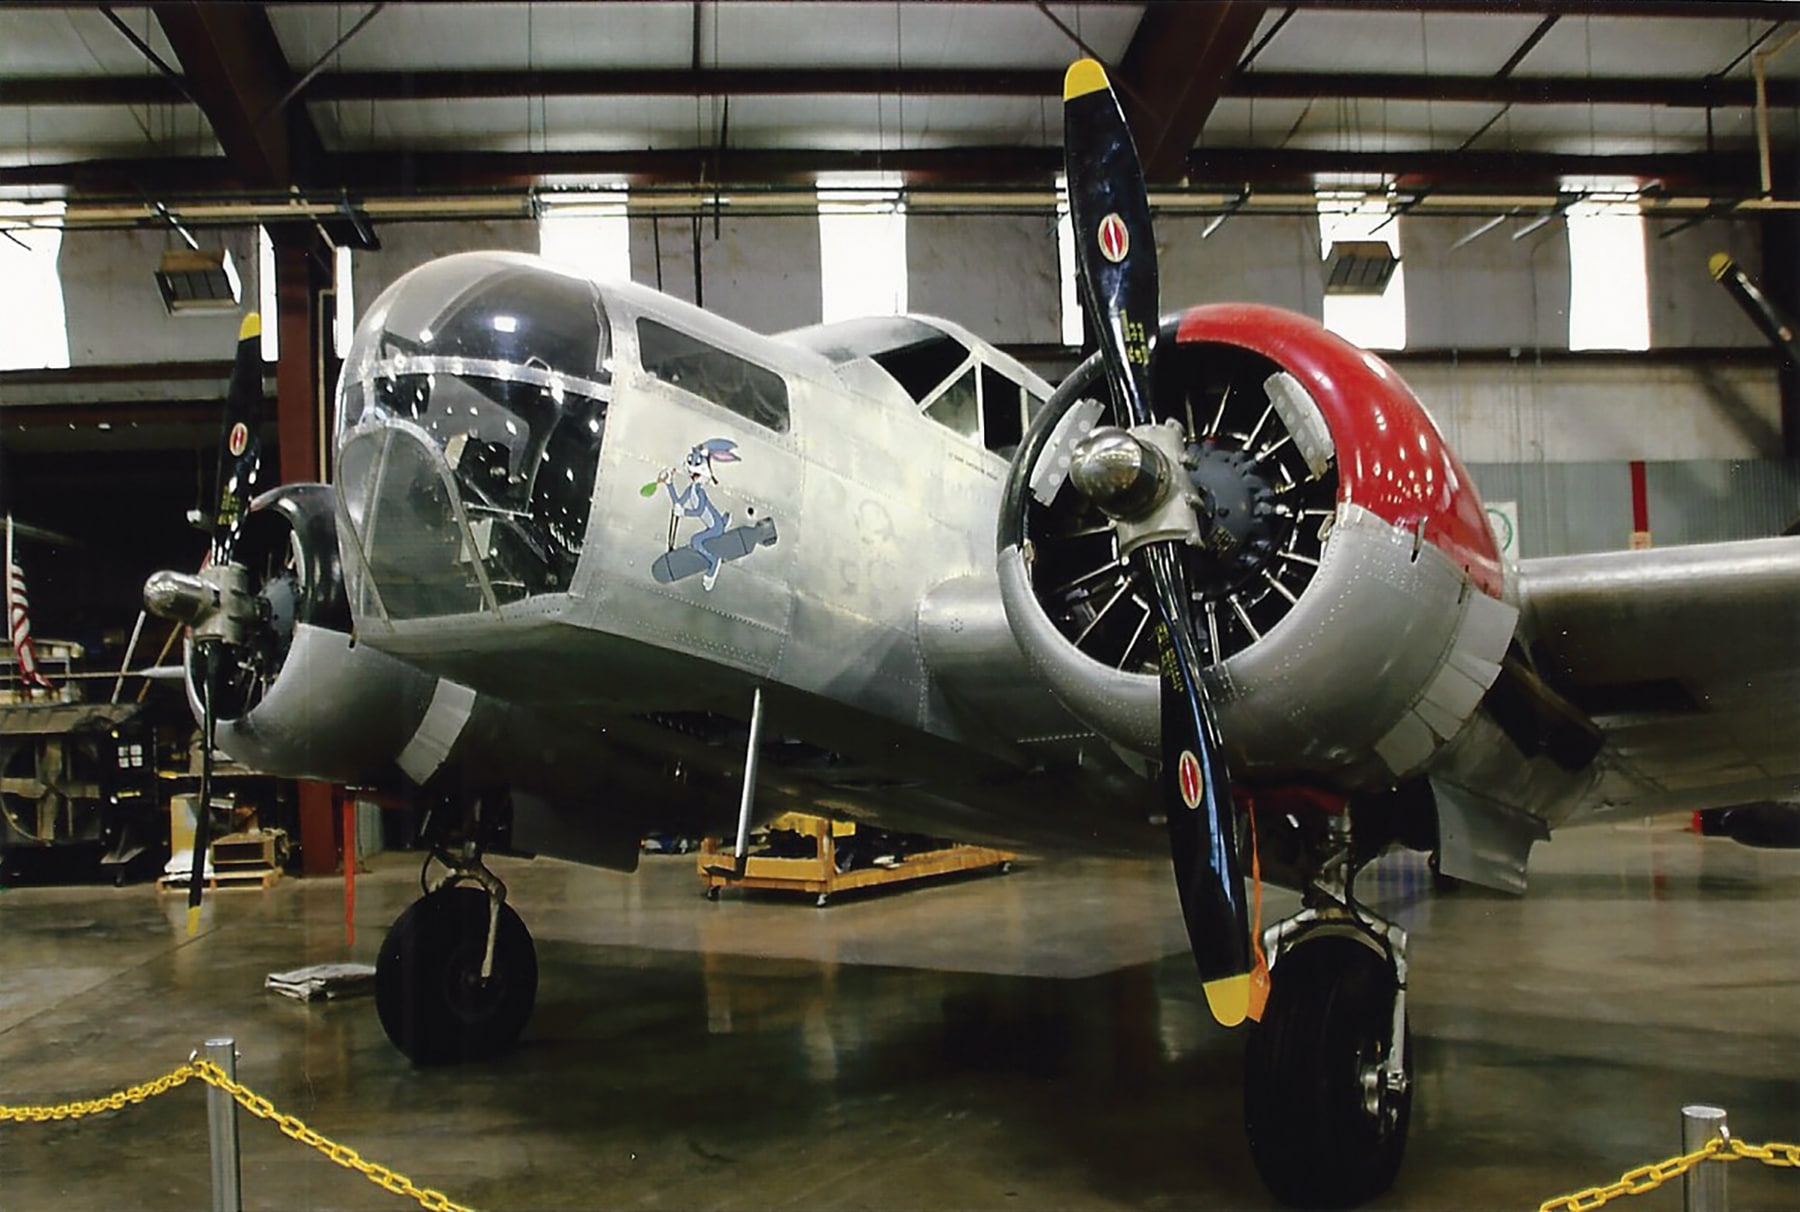 THE KANSAN Nicknamed for the location of the aircraft plant where it was manufactured (Wichita, Kansas), this 1942 Beechcraft AT-11 Kansan bombardier is a favorite backdrop for group photos at the Midland Army Air Force Museum. | Courtesy H. A. Tuck, Jr.